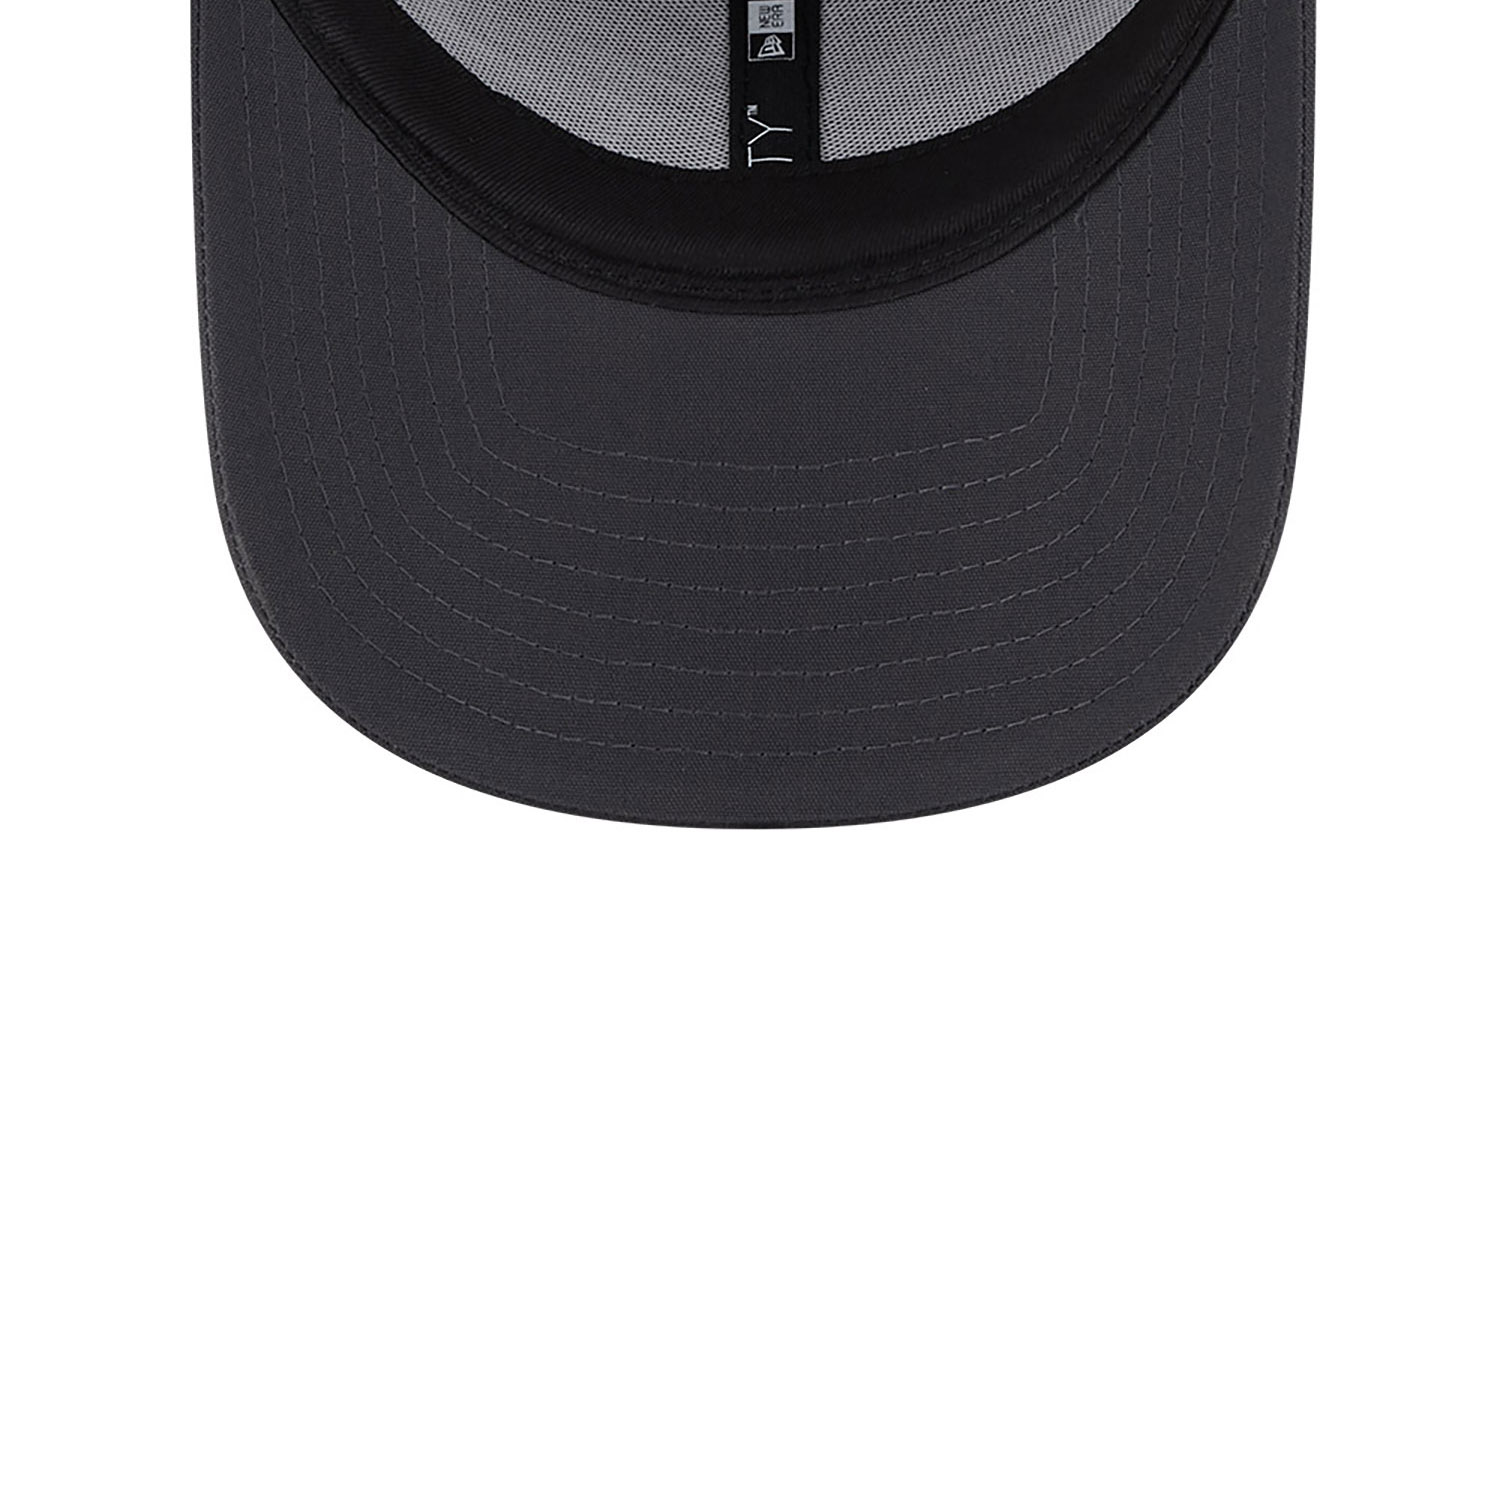 Manchester United FC Repreve&#174; Grey 9FORTY Adjustable Cap